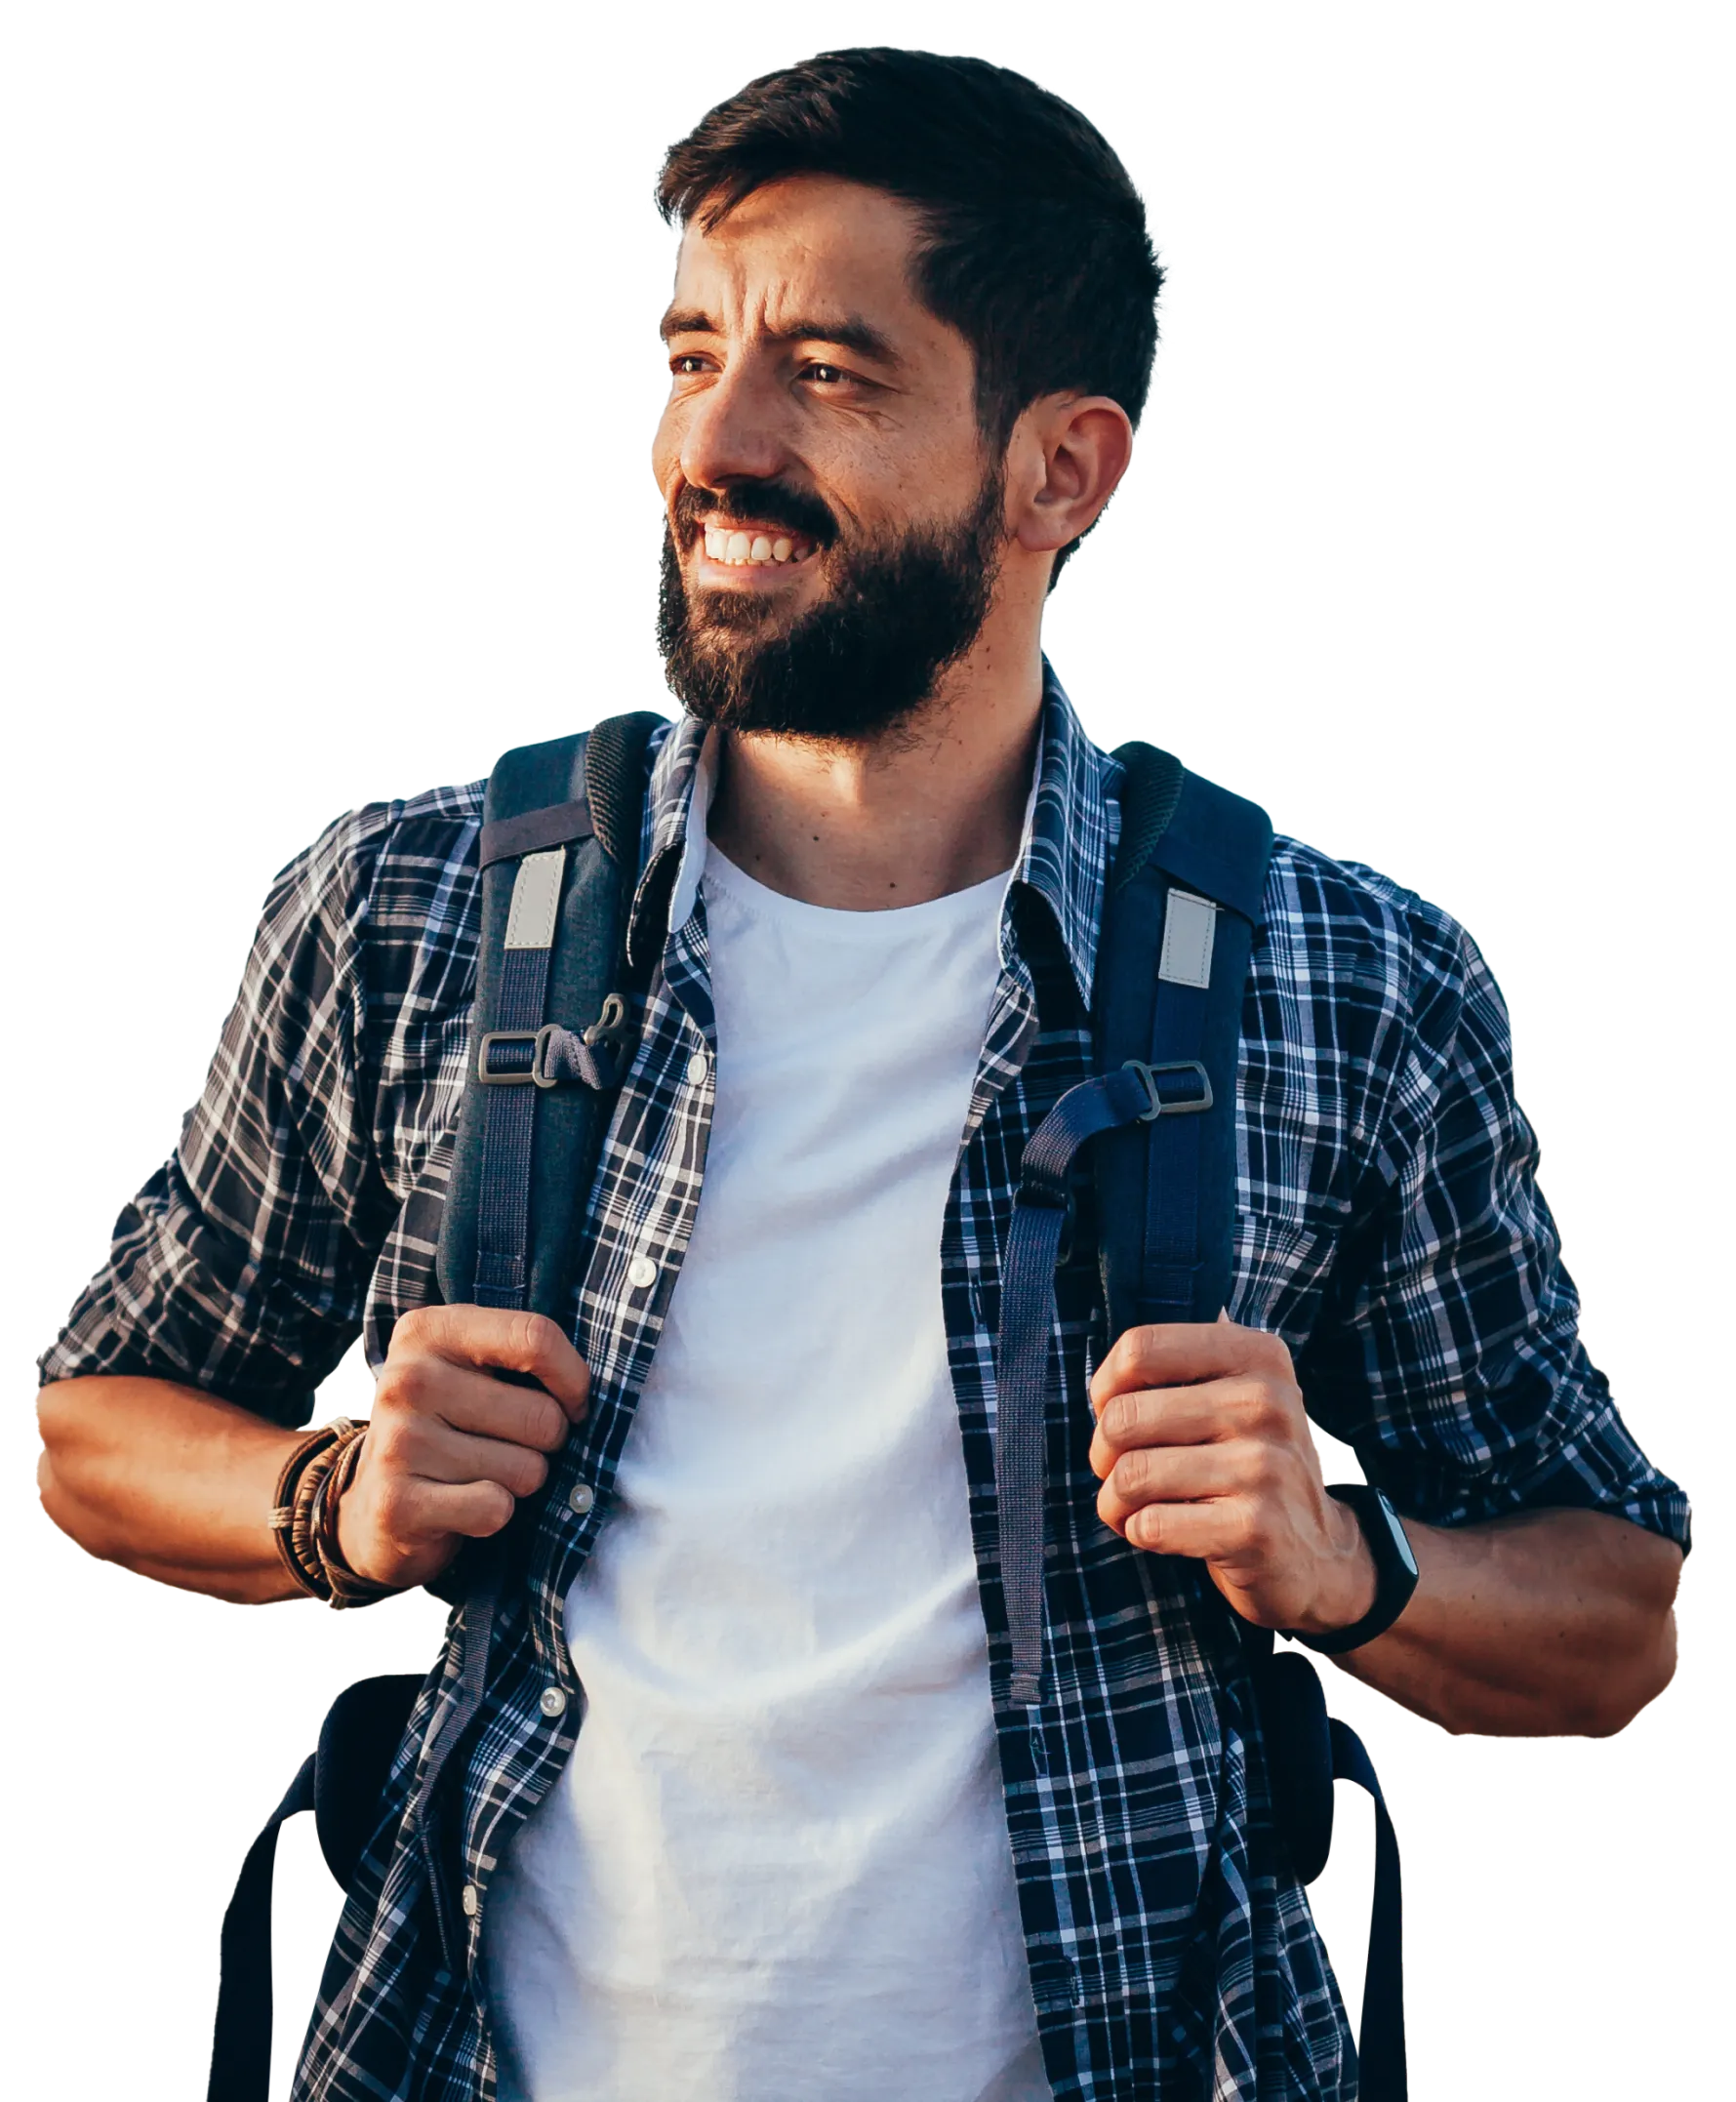 Smiling man with a backpack